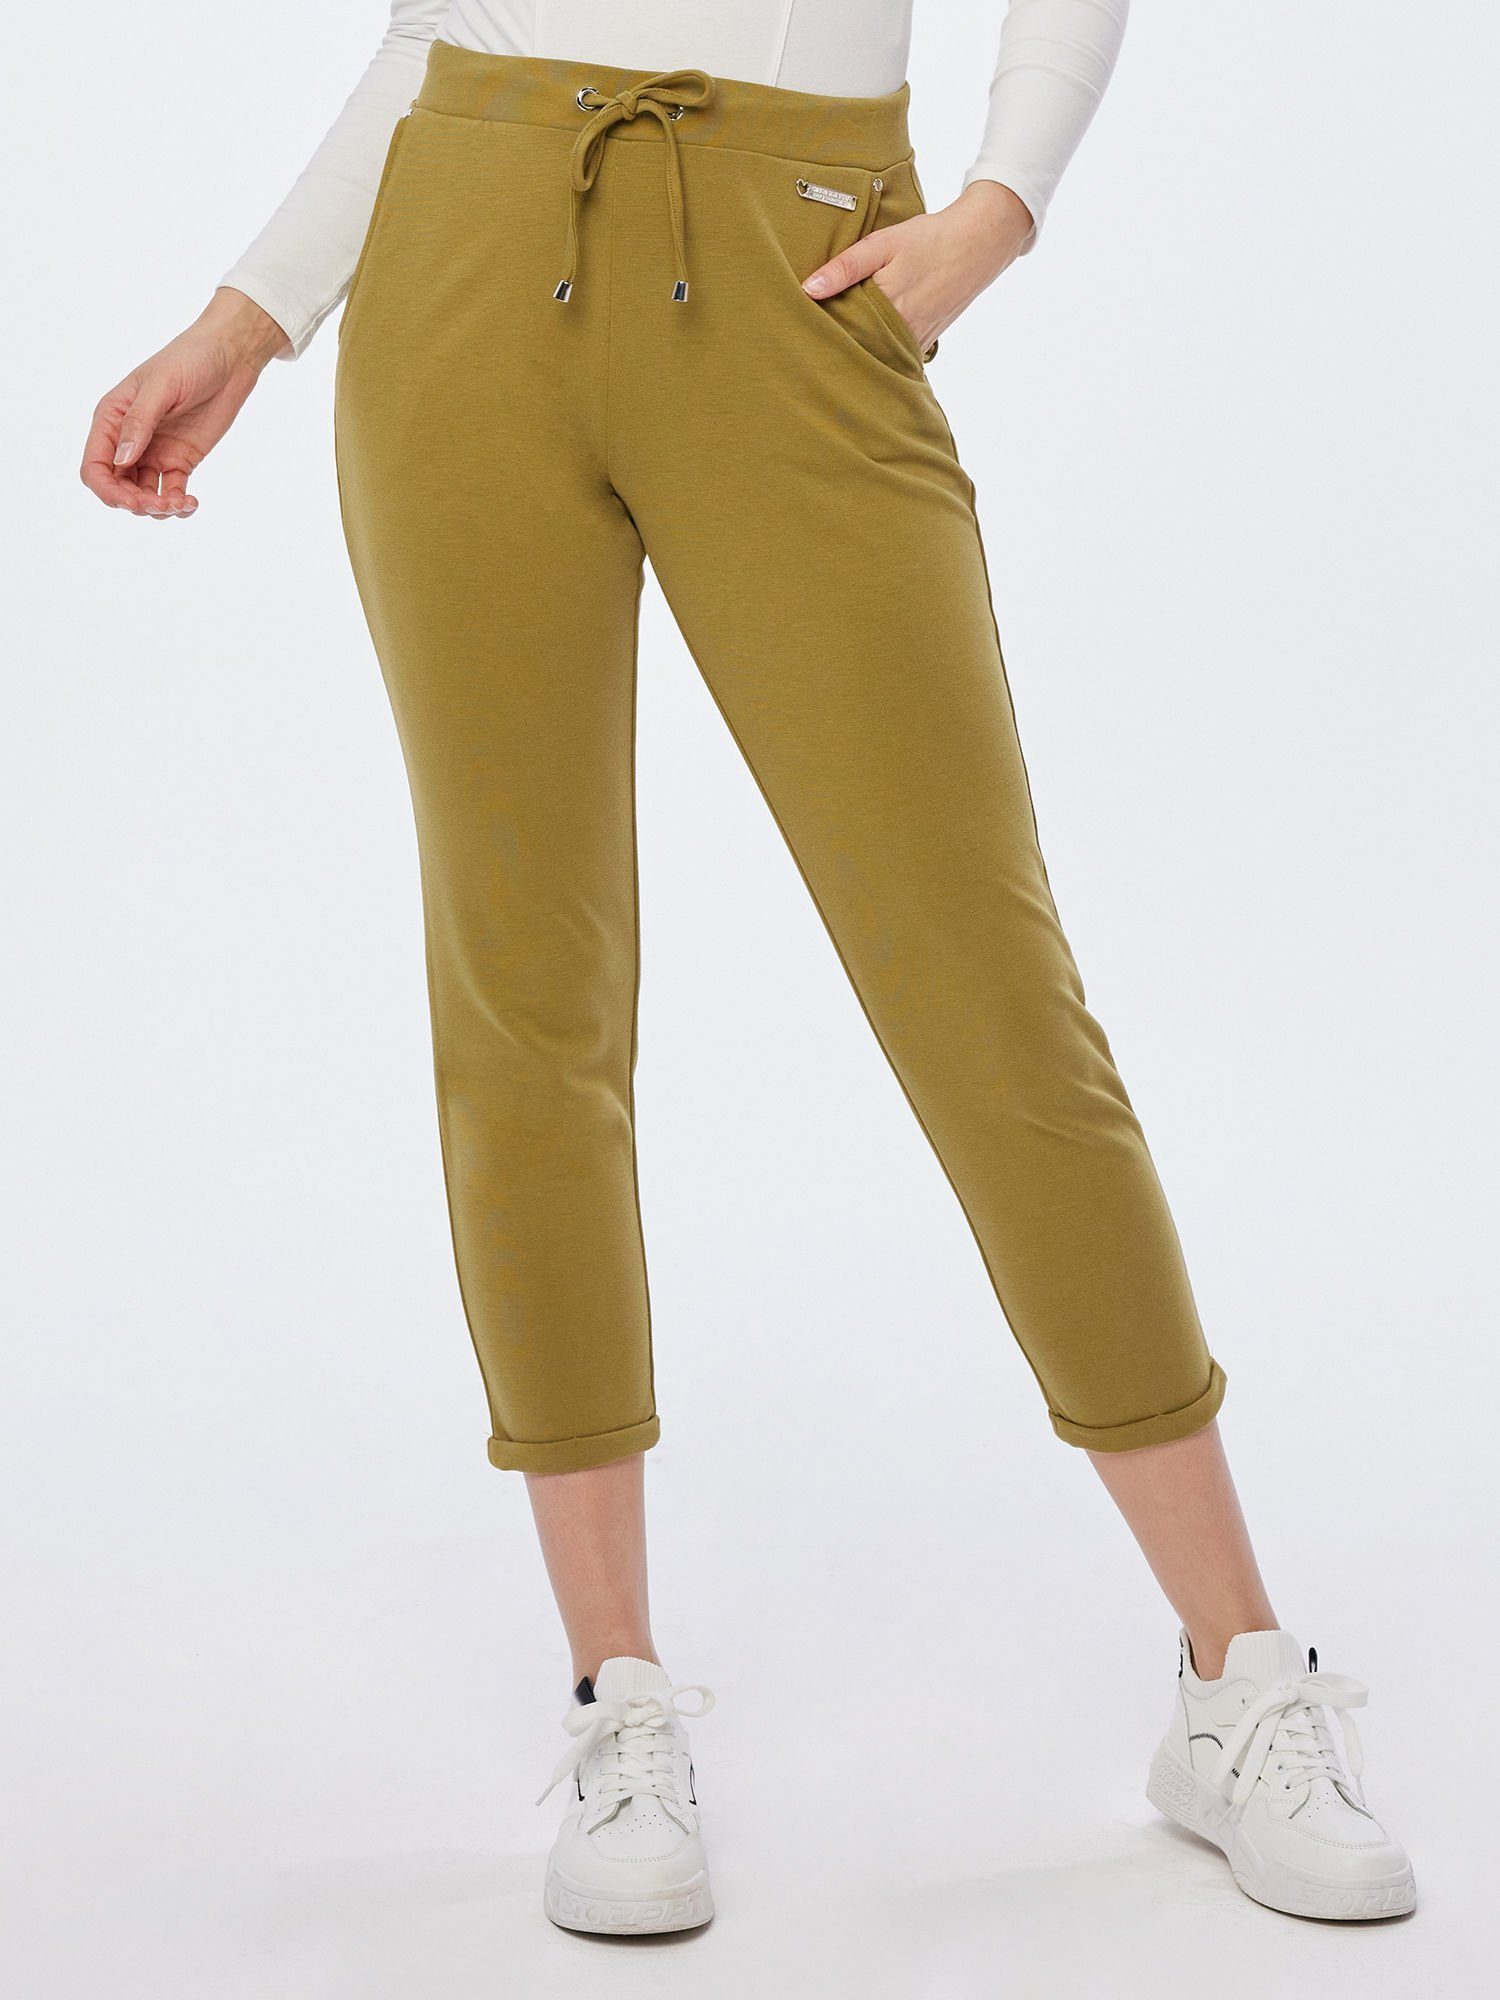 Christian Materne Jogger Pants Relaxhose mit Umschlagsaum oliv